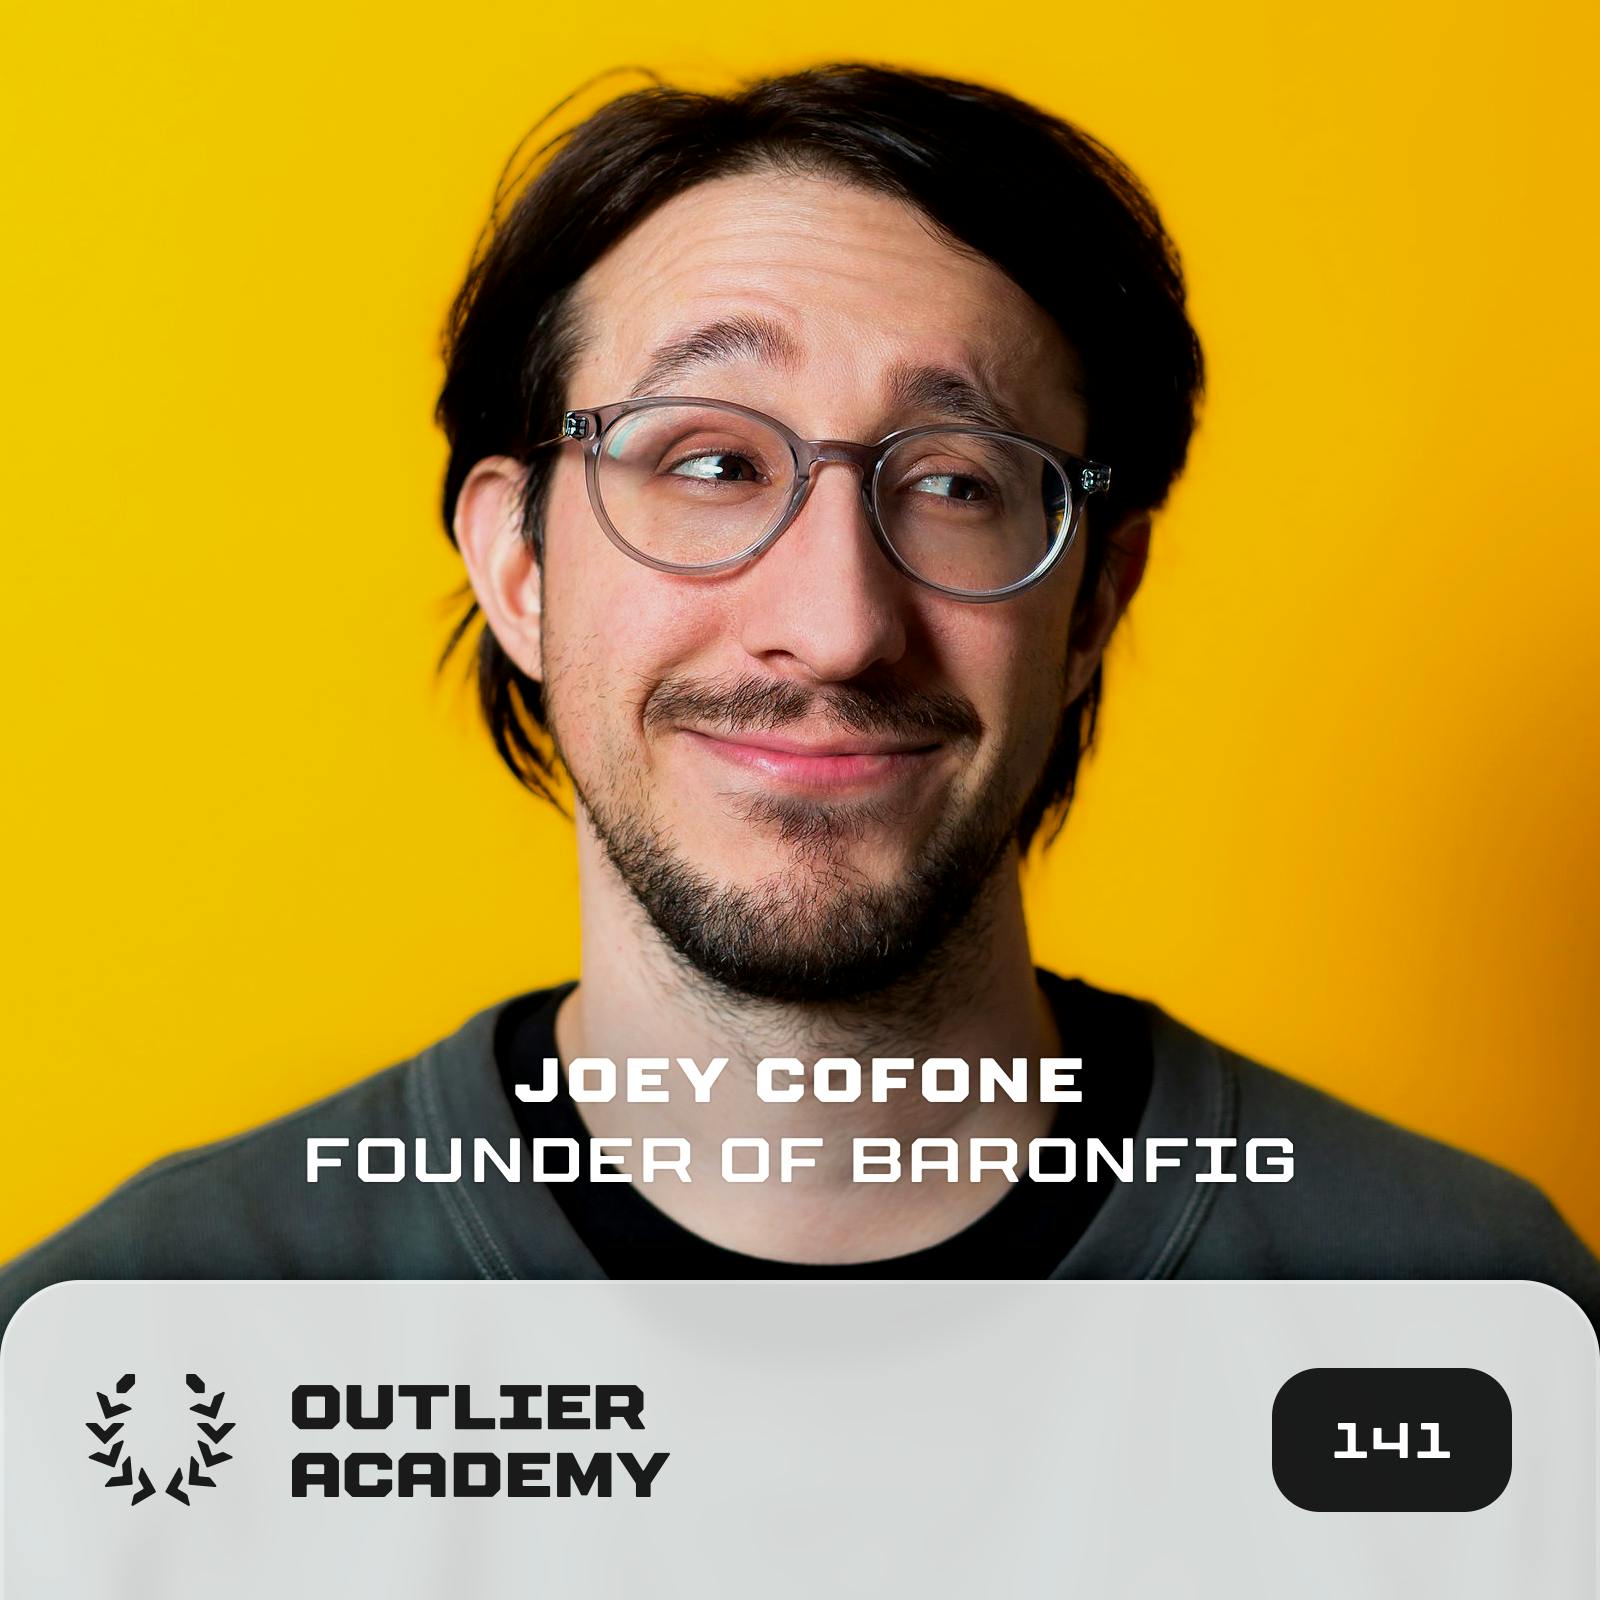 #141 Joey Cofone, Founder & CEO of Baronfig | Favorite Baronfig Products, Skill vs Renown, Daily Disciplines, Favorite Books, and More